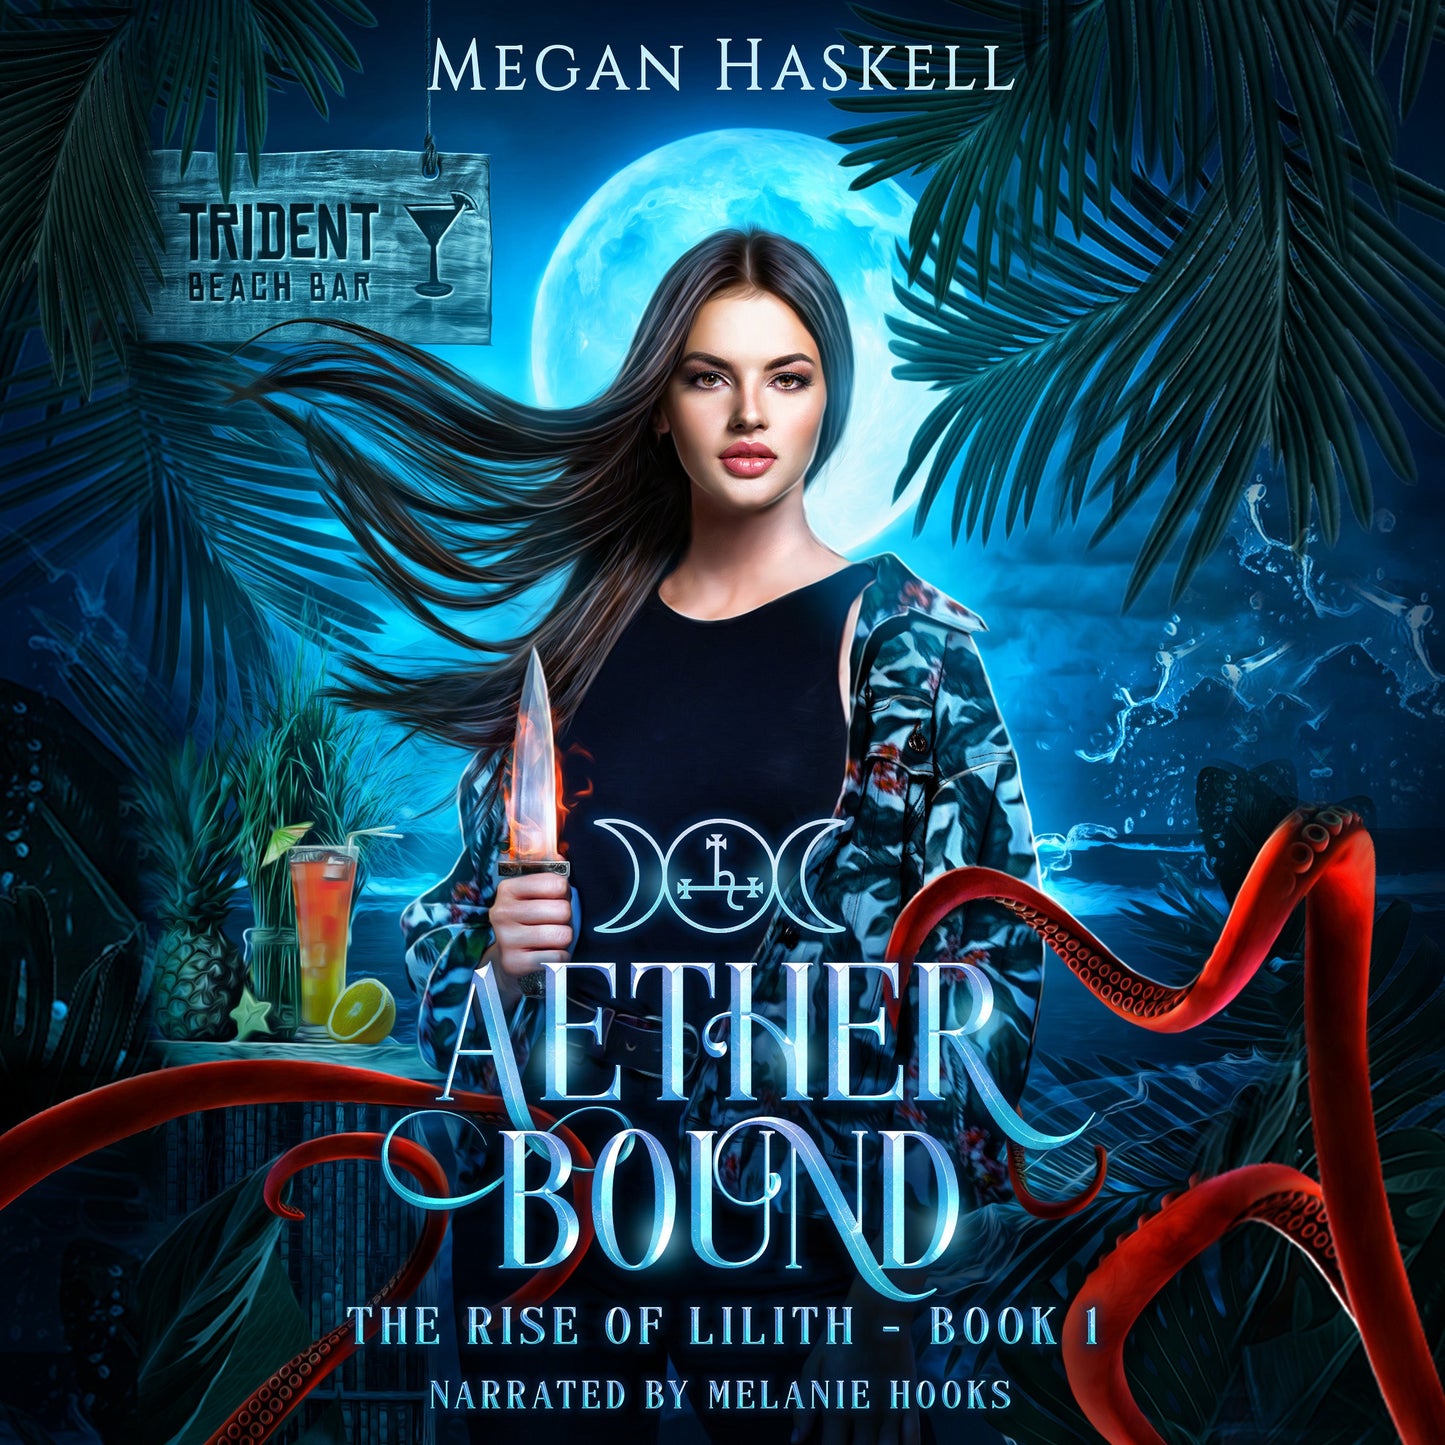 Aether Bound (Book 1) - All Format Bundle